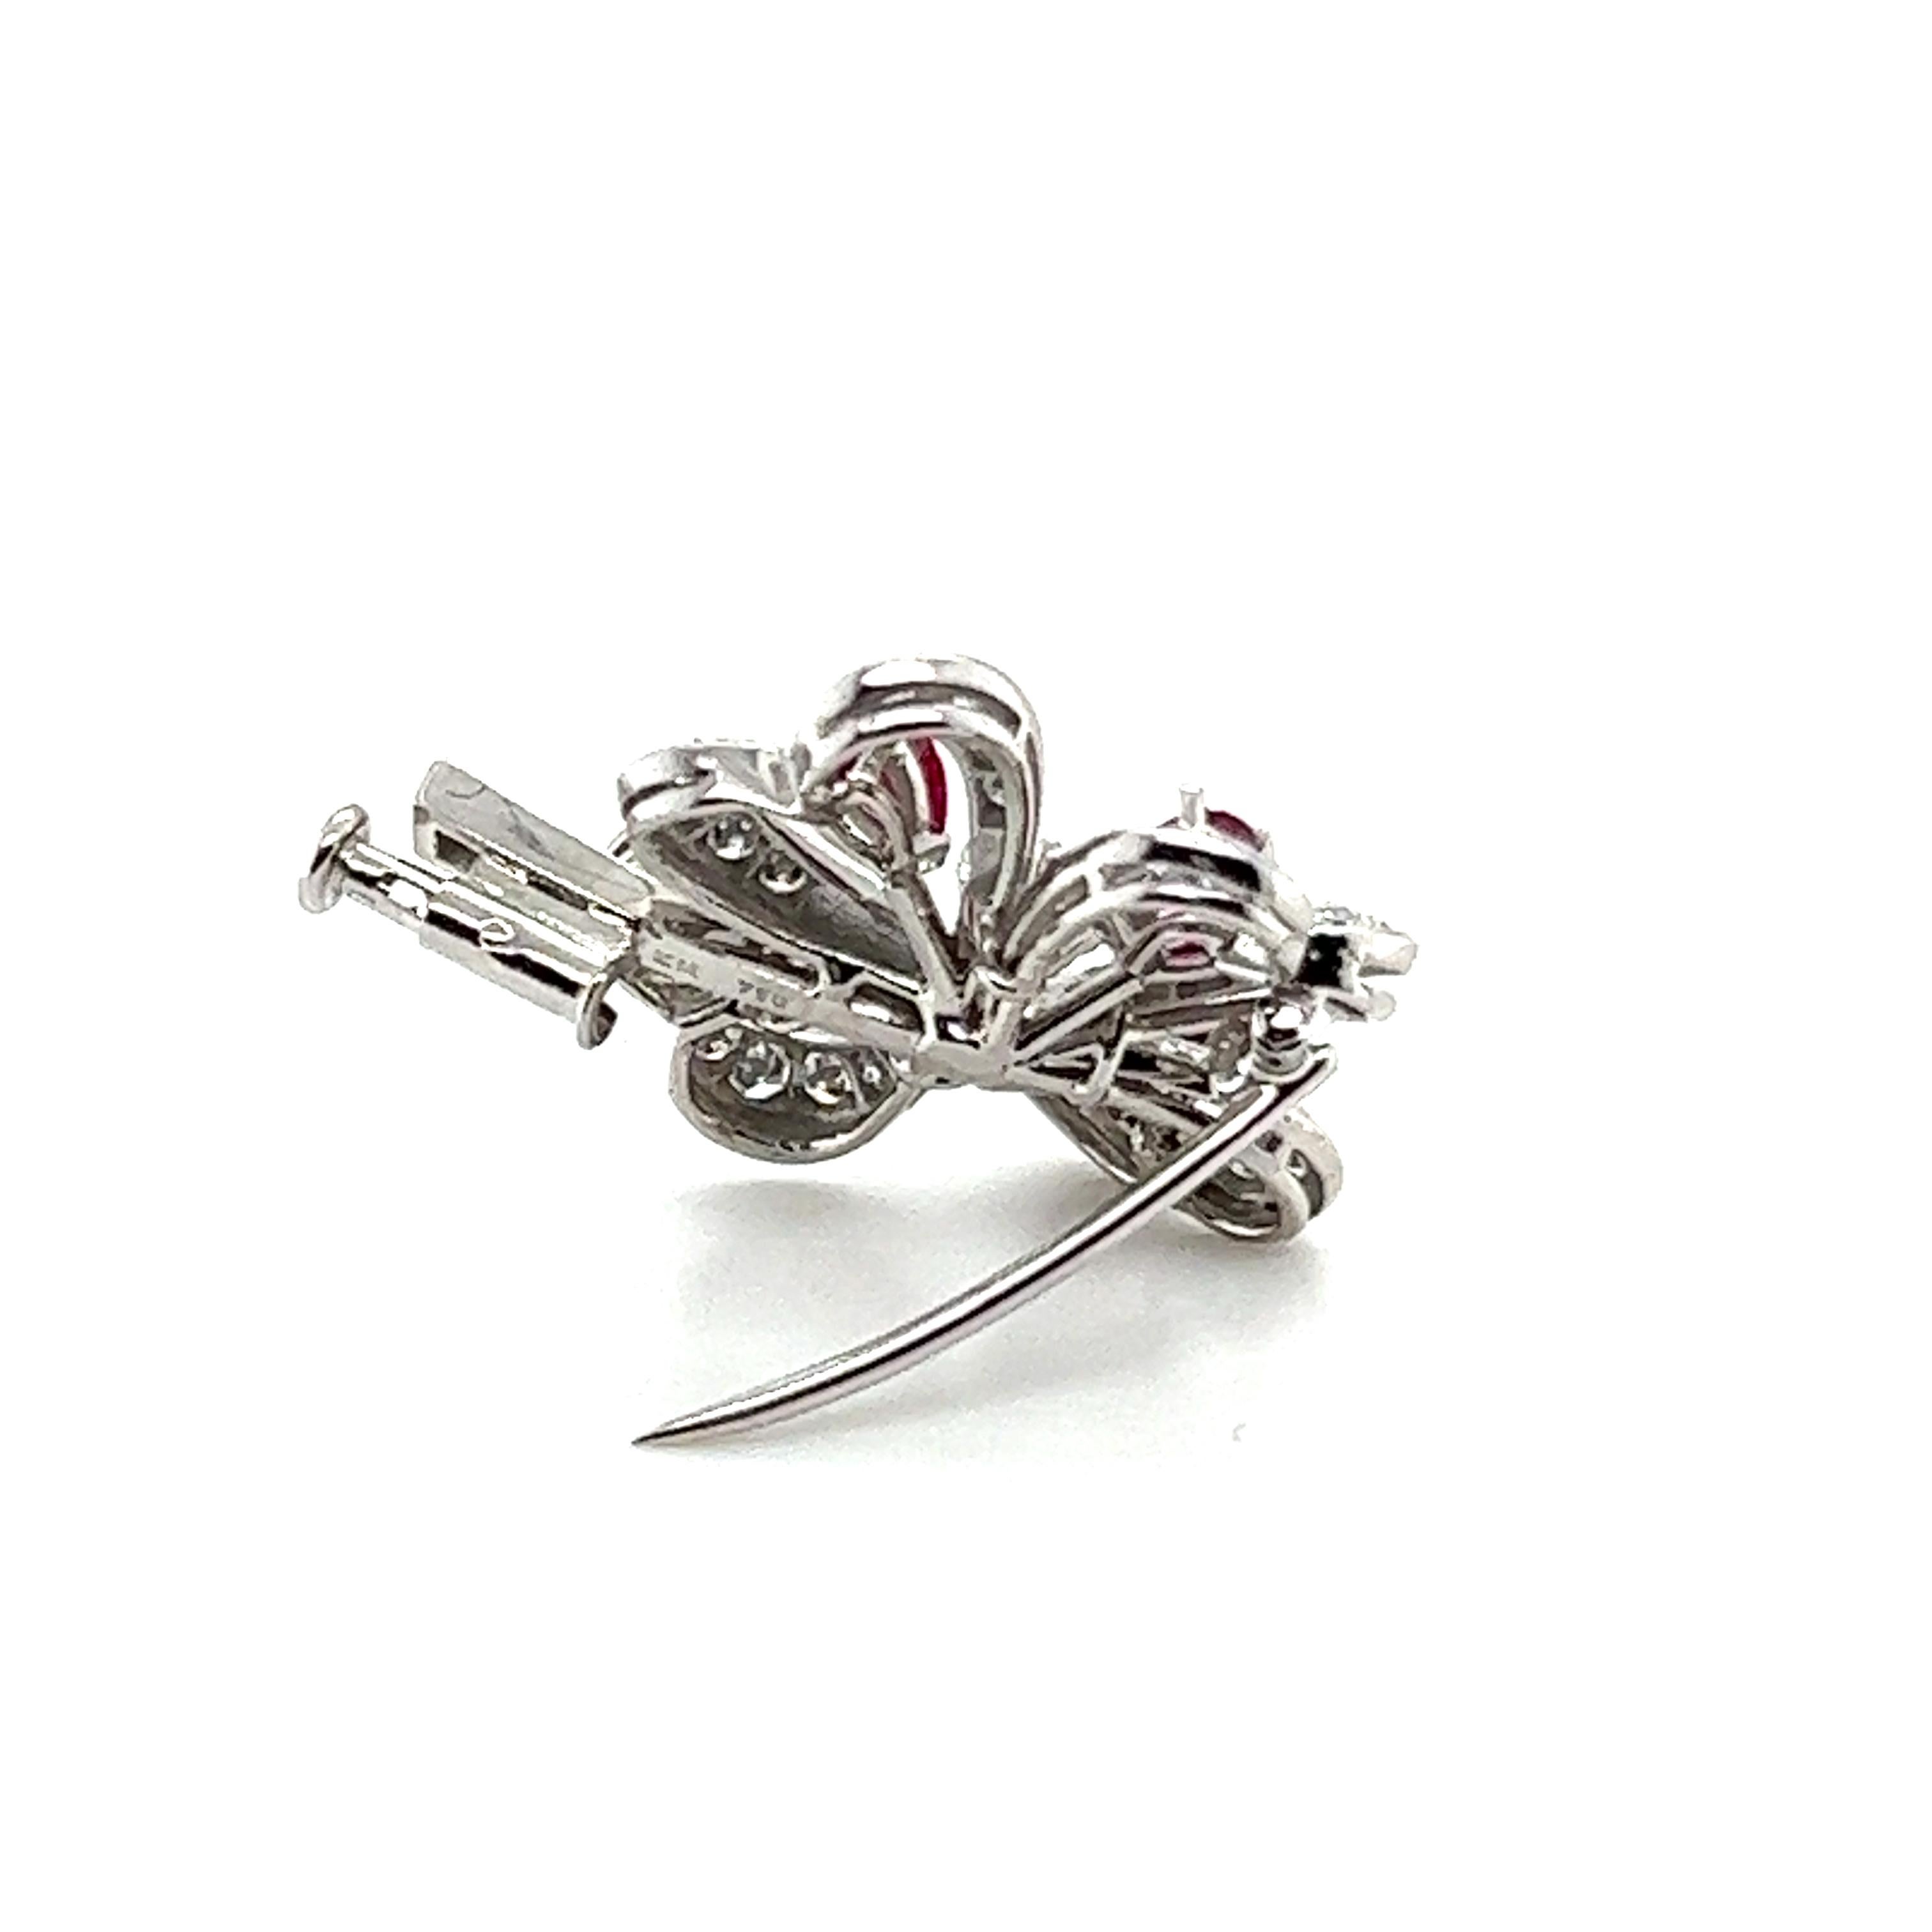 Clover Brooch with Rubies & Diamonds in 18 Karat White Gold by Meister 4